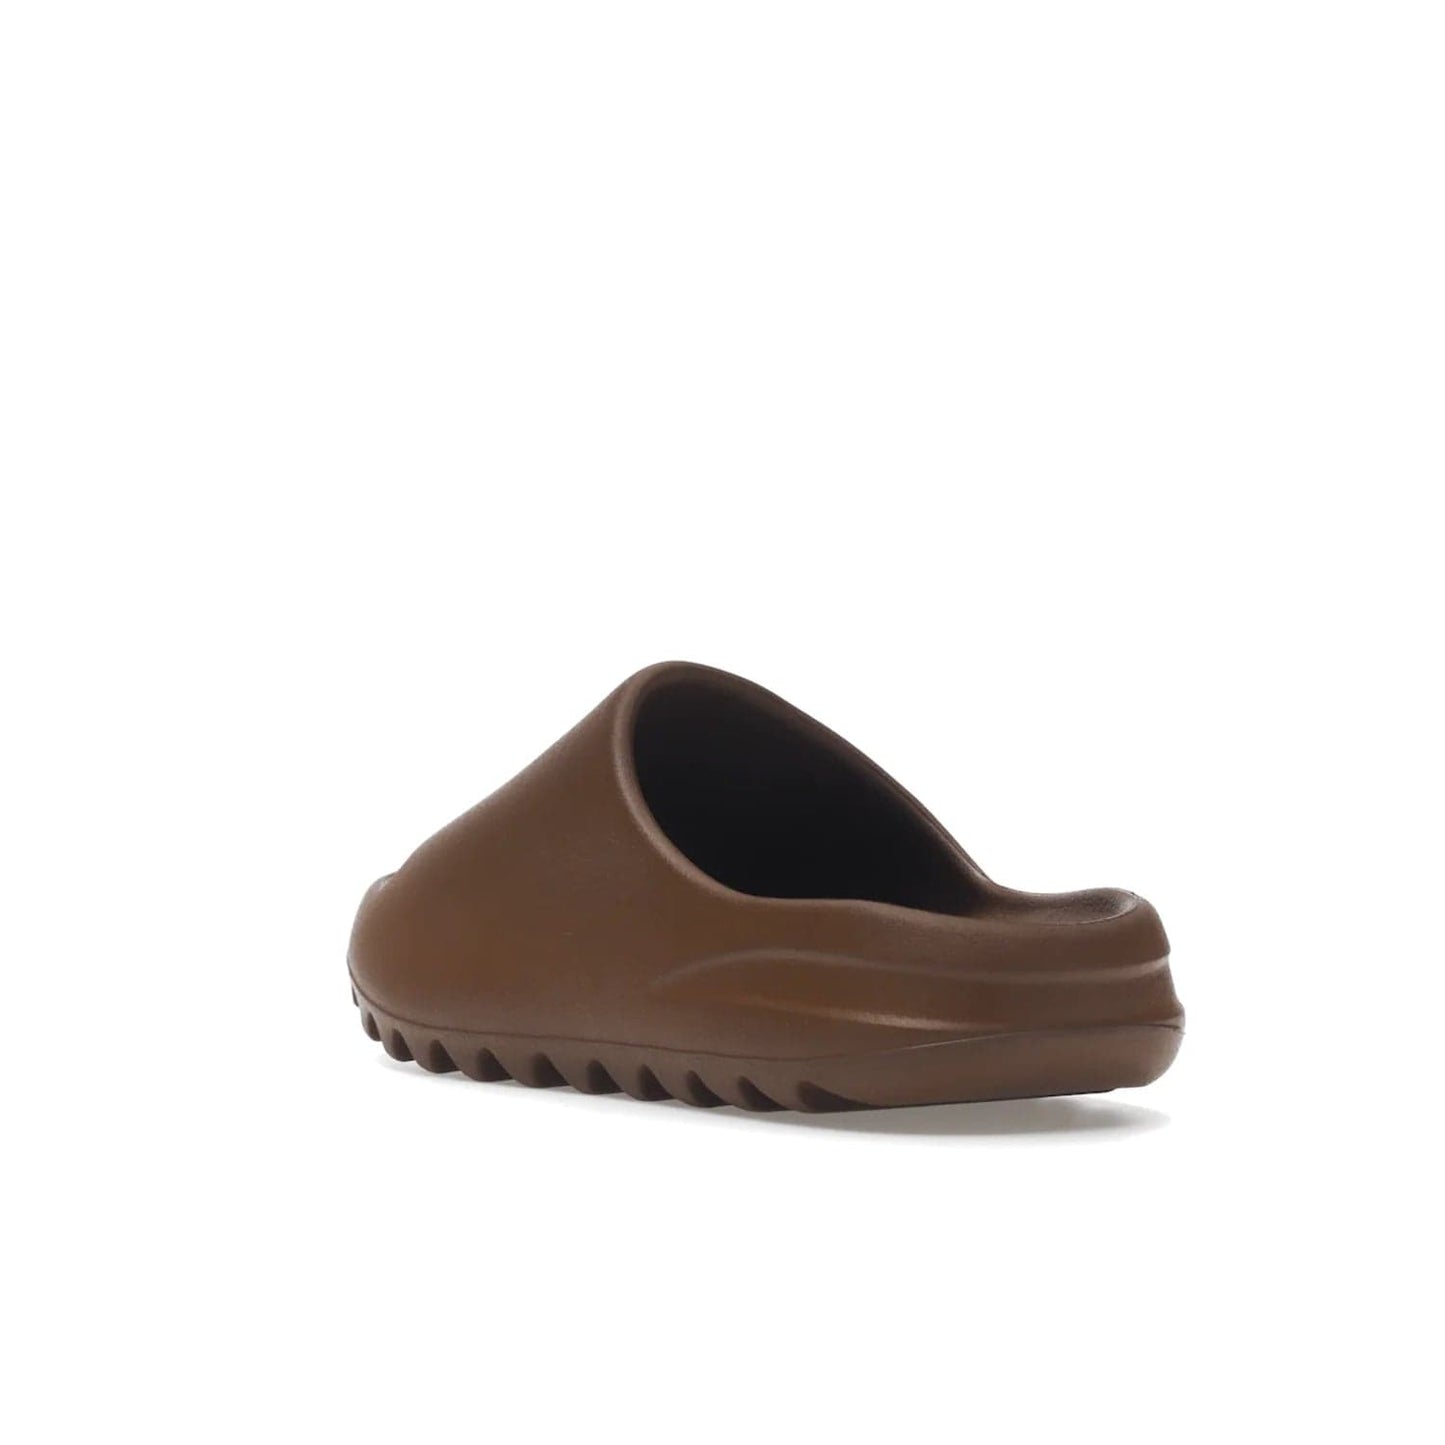 adidas Yeezy Slide Flax - Image 25 - Only at www.BallersClubKickz.com - Score the perfect casual look with the adidas Yeezy Slide Flax. Made with lightweight injected EVA plus horizontal grooves underfoot for traction. Release on August 22, 2022. $70.